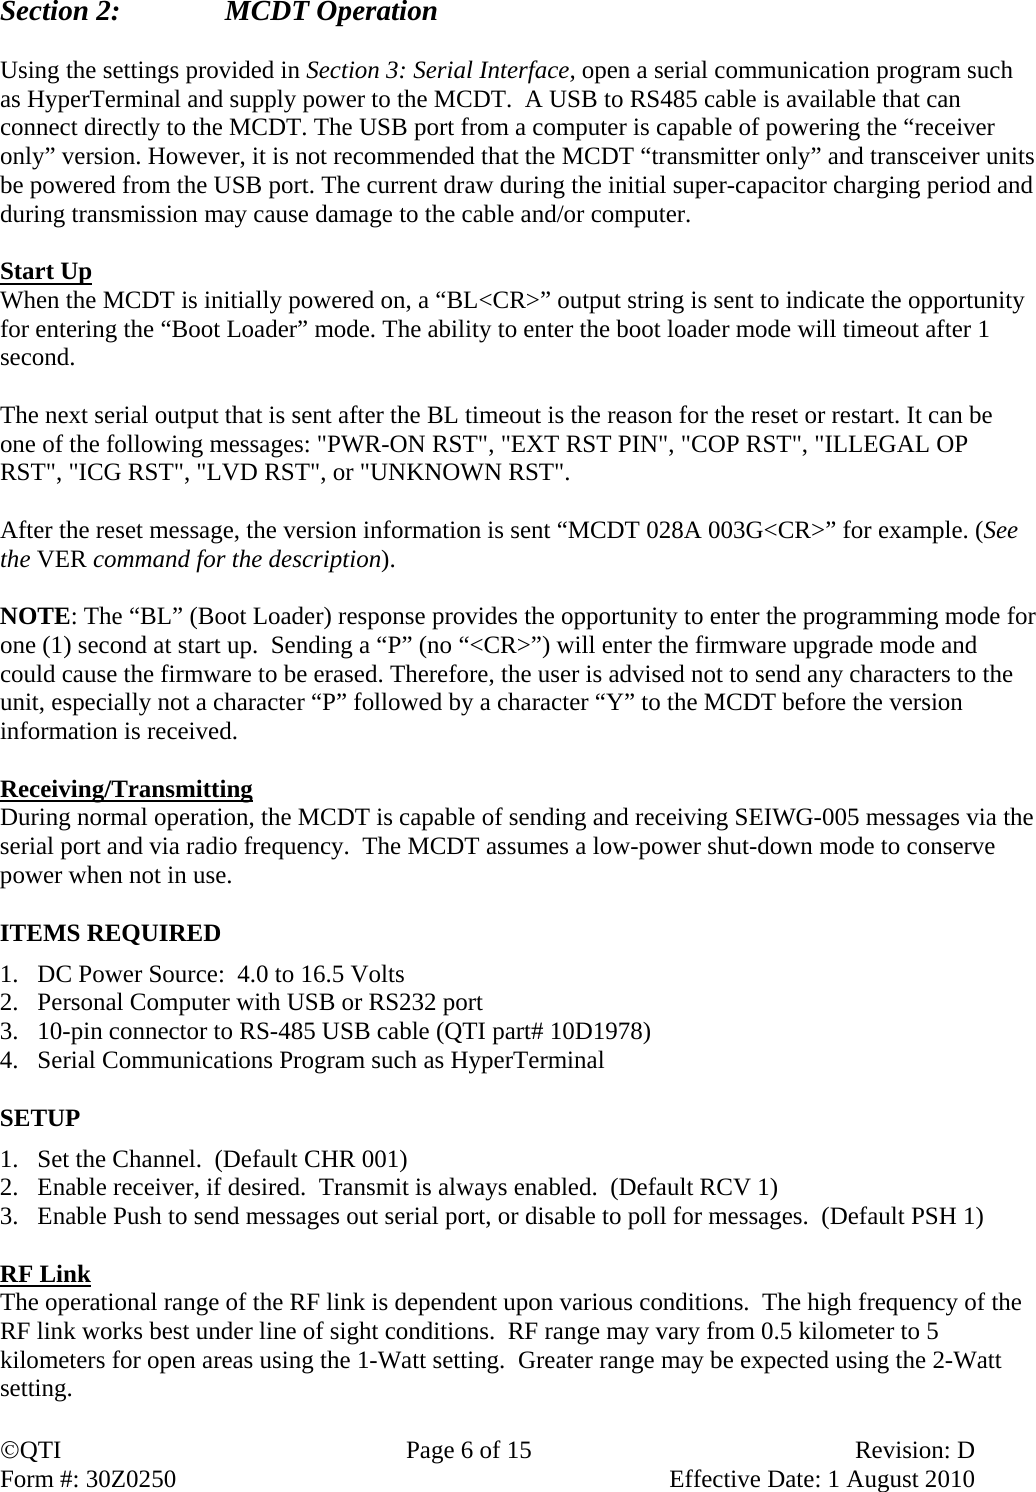 QTI  Page 6 of 15  Revision: D Form #: 30Z0250    Effective Date: 1 August 2010 Section 2:    MCDT Operation  Using the settings provided in Section 3: Serial Interface, open a serial communication program such as HyperTerminal and supply power to the MCDT.  A USB to RS485 cable is available that can connect directly to the MCDT. The USB port from a computer is capable of powering the “receiver only” version. However, it is not recommended that the MCDT “transmitter only” and transceiver units be powered from the USB port. The current draw during the initial super-capacitor charging period and during transmission may cause damage to the cable and/or computer.   Start Up When the MCDT is initially powered on, a “BL&lt;CR&gt;” output string is sent to indicate the opportunity for entering the “Boot Loader” mode. The ability to enter the boot loader mode will timeout after 1 second.   The next serial output that is sent after the BL timeout is the reason for the reset or restart. It can be one of the following messages: &quot;PWR-ON RST&quot;, &quot;EXT RST PIN&quot;, &quot;COP RST&quot;, &quot;ILLEGAL OP RST&quot;, &quot;ICG RST&quot;, &quot;LVD RST&quot;, or &quot;UNKNOWN RST&quot;.   After the reset message, the version information is sent “MCDT 028A 003G&lt;CR&gt;” for example. (See the VER command for the description).  NOTE: The “BL” (Boot Loader) response provides the opportunity to enter the programming mode for one (1) second at start up.  Sending a “P” (no “&lt;CR&gt;”) will enter the firmware upgrade mode and could cause the firmware to be erased. Therefore, the user is advised not to send any characters to the unit, especially not a character “P” followed by a character “Y” to the MCDT before the version information is received.   Receiving/Transmitting During normal operation, the MCDT is capable of sending and receiving SEIWG-005 messages via the serial port and via radio frequency.  The MCDT assumes a low-power shut-down mode to conserve power when not in use.  ITEMS REQUIRED 1. DC Power Source:  4.0 to 16.5 Volts 2. Personal Computer with USB or RS232 port 3. 10-pin connector to RS-485 USB cable (QTI part# 10D1978)  4. Serial Communications Program such as HyperTerminal  SETUP 1. Set the Channel.  (Default CHR 001) 2. Enable receiver, if desired.  Transmit is always enabled.  (Default RCV 1) 3. Enable Push to send messages out serial port, or disable to poll for messages.  (Default PSH 1)  RF Link The operational range of the RF link is dependent upon various conditions.  The high frequency of the RF link works best under line of sight conditions.  RF range may vary from 0.5 kilometer to 5 kilometers for open areas using the 1-Watt setting.  Greater range may be expected using the 2-Watt setting.  